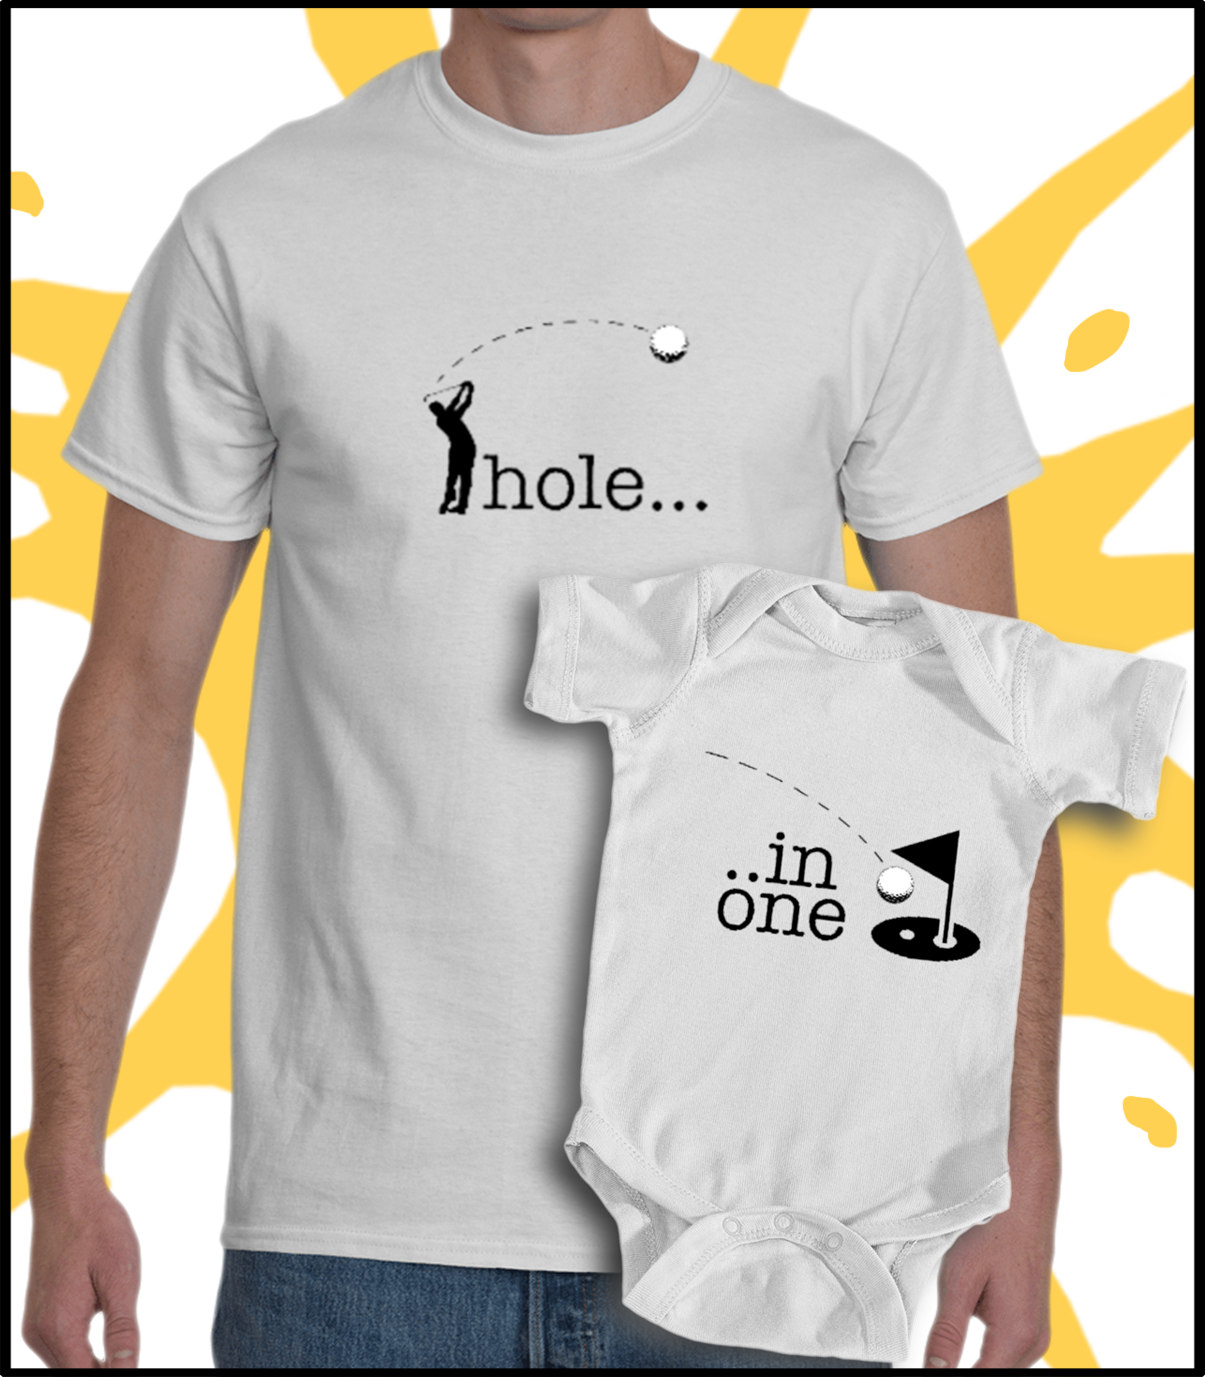 Test3.Troy.golf.hole-in-one.T-shirt-banner.sidebar.TEMPLATE1_edited-1.png